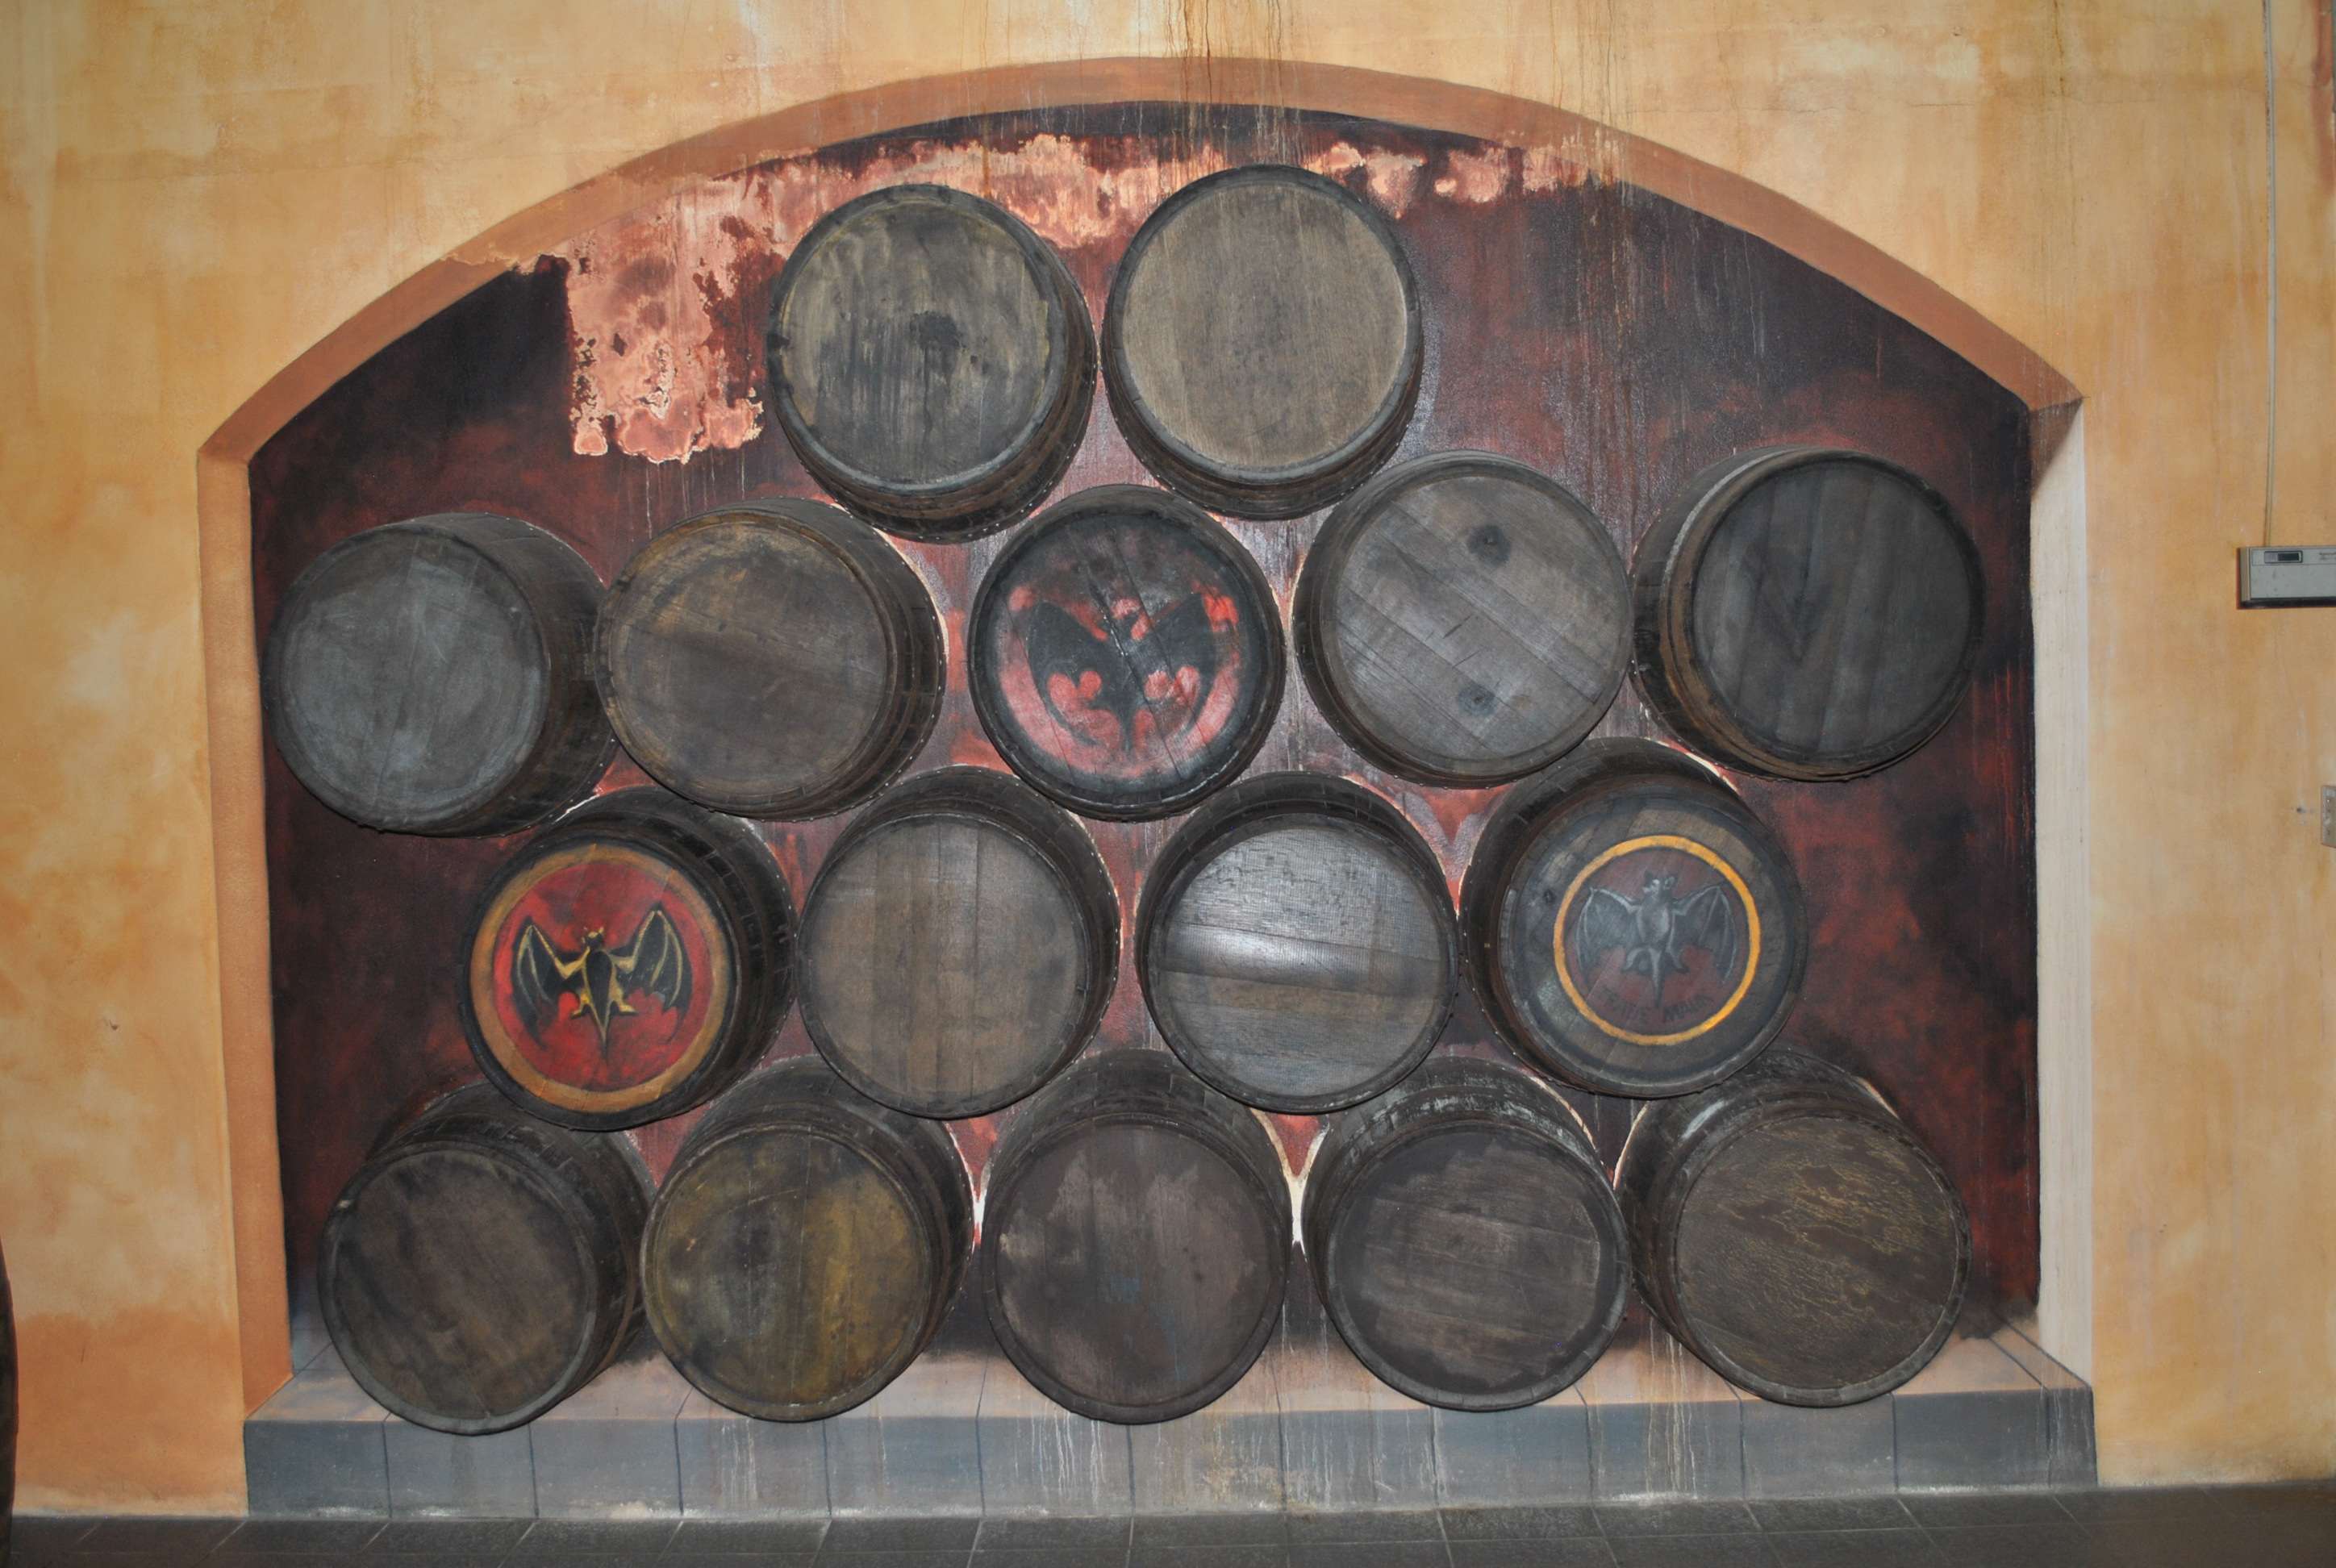 Old rum barrels with the Barcardi Rum (Puetro Rico)logo